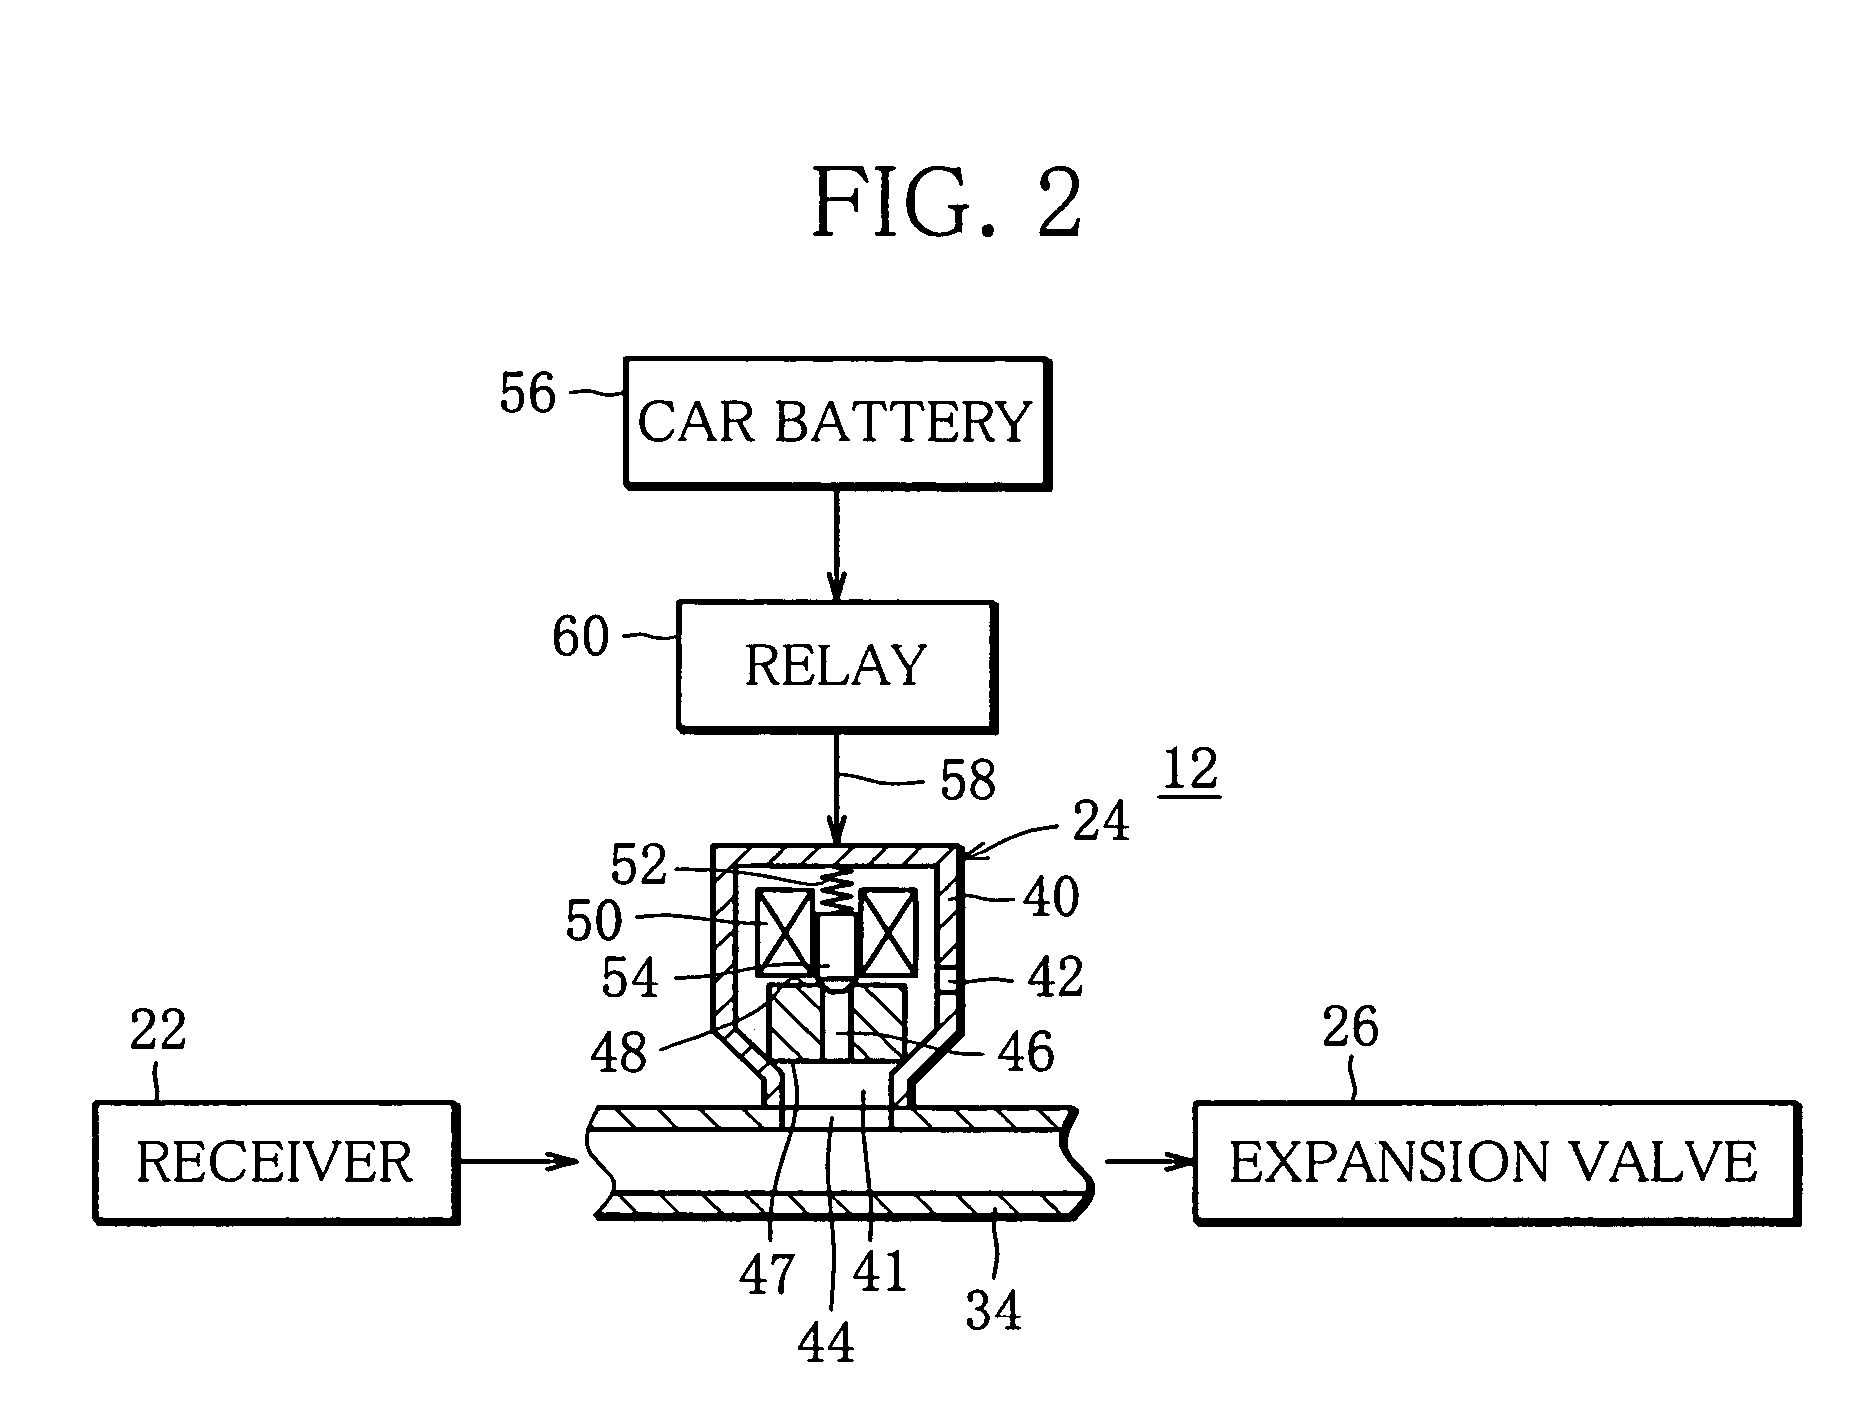 Air-conditioning system for vehicle